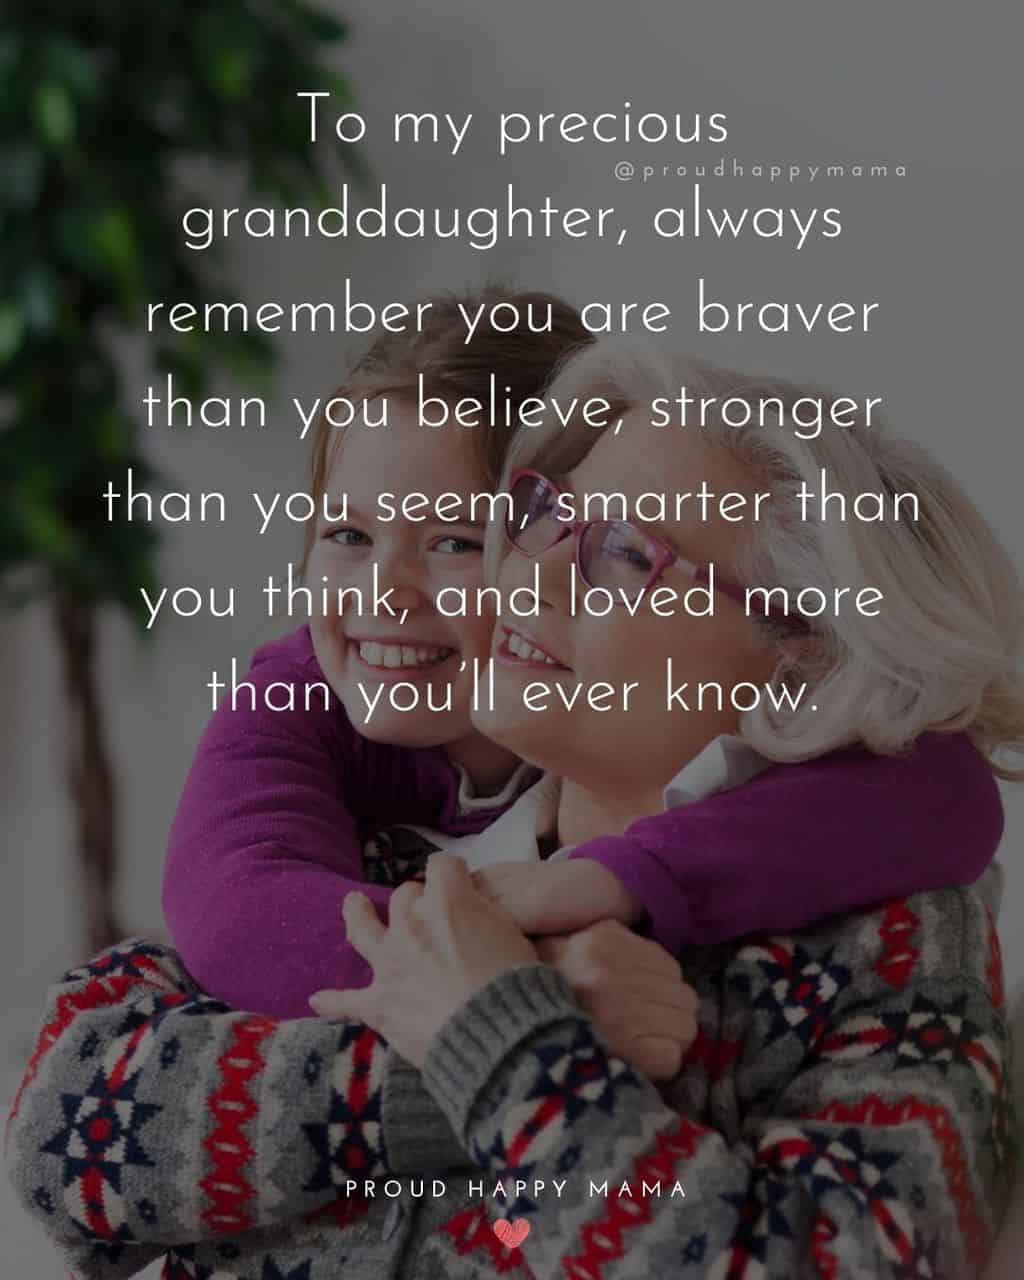 Granddaughter Quotes - To my precious granddaughter, always remember you are braver than you believe, stronger than you